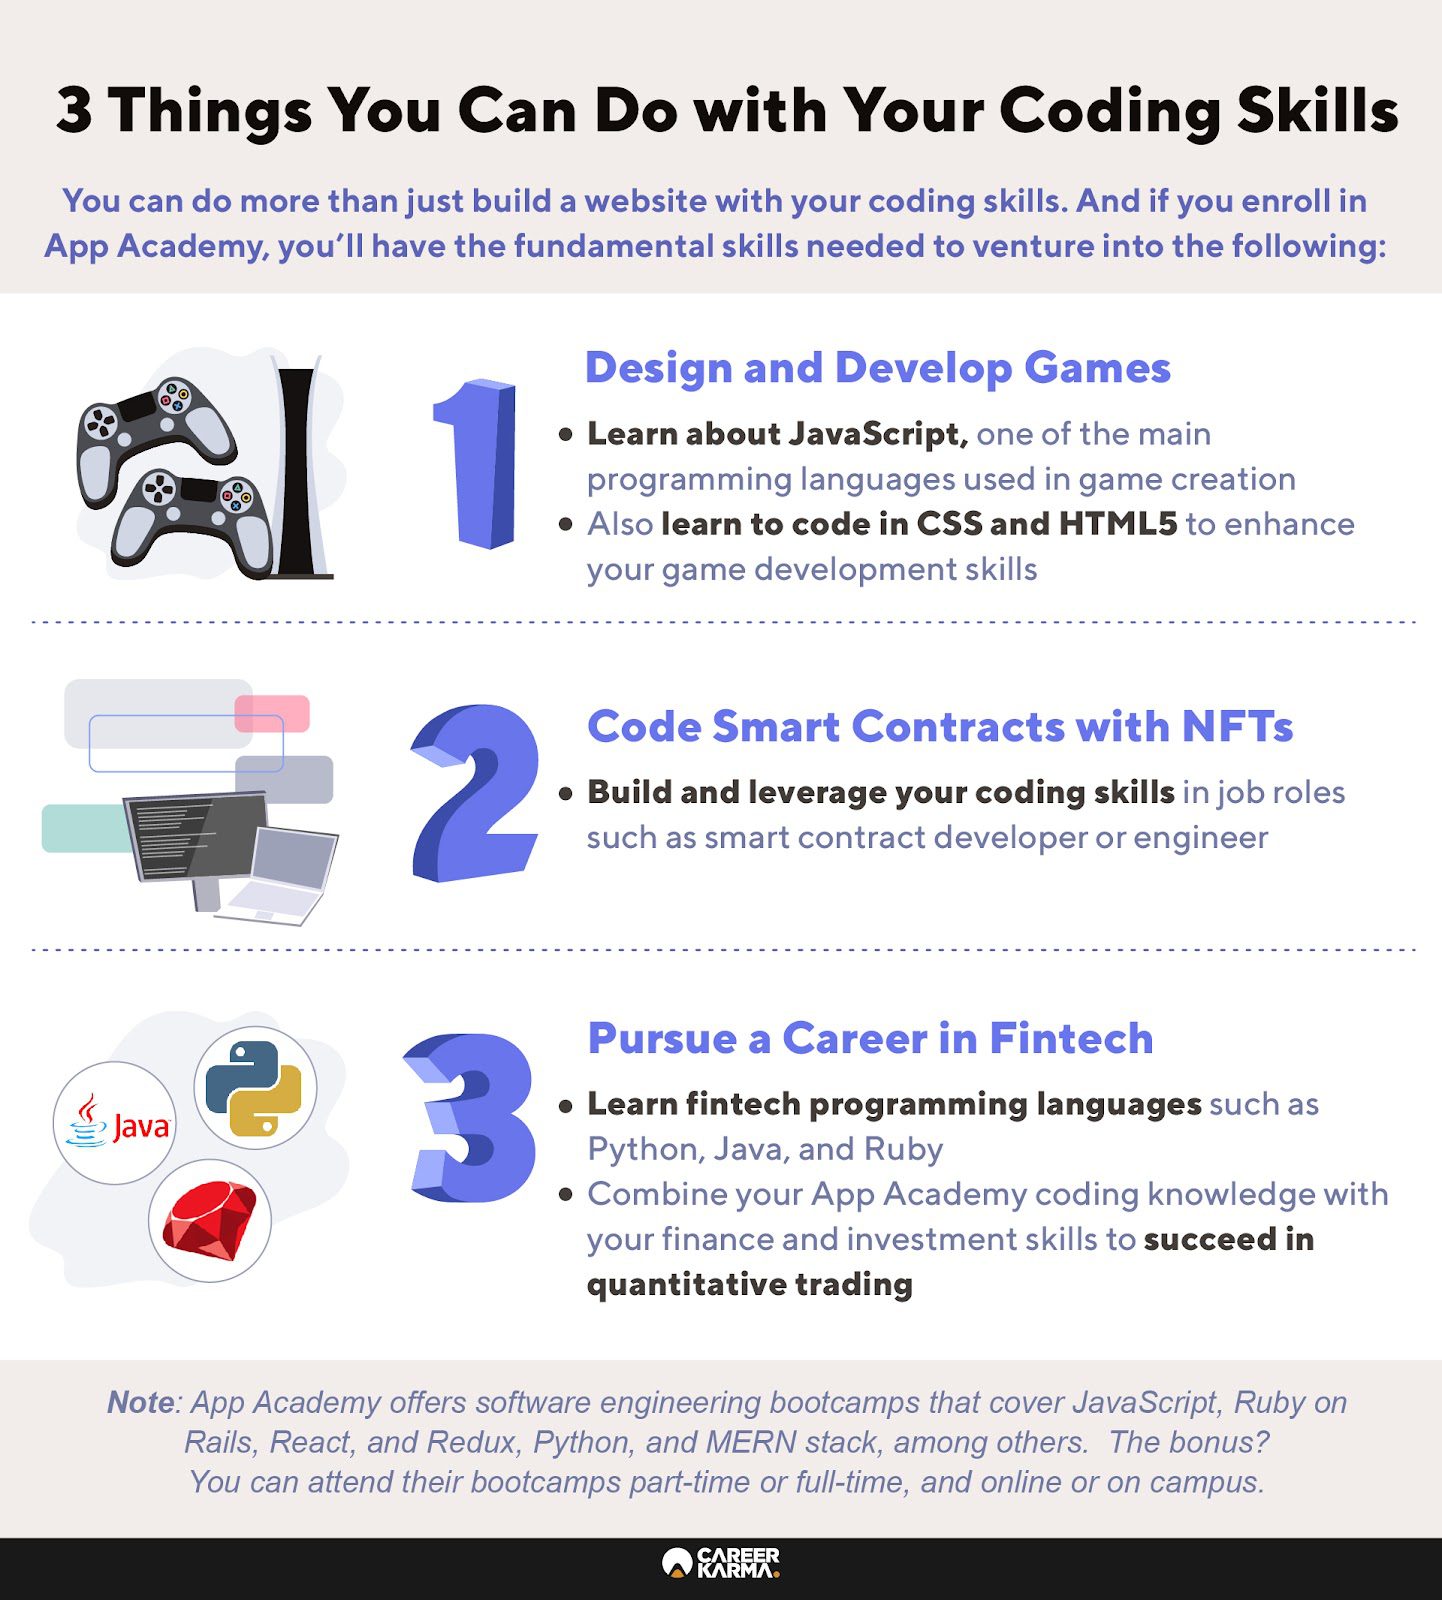 An infographic highlighting three things you can do with your coding skills